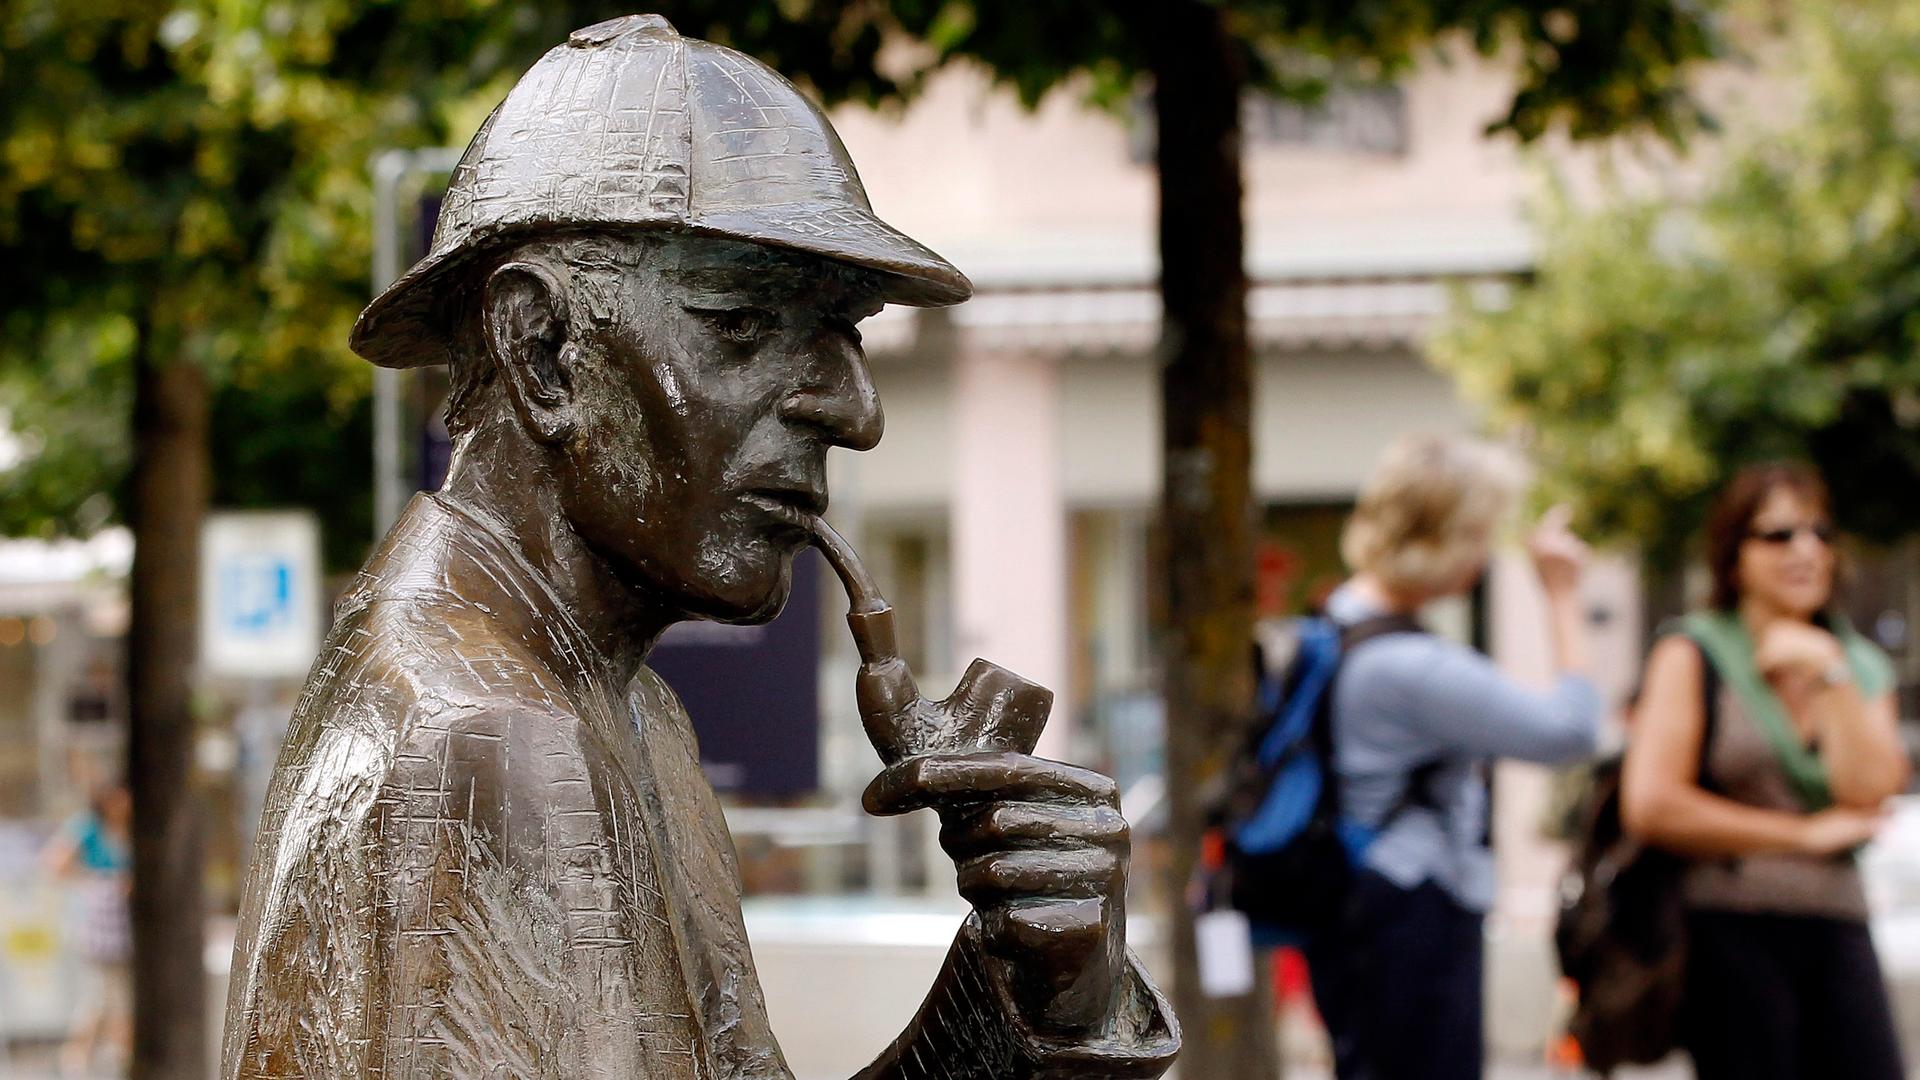 A life-size bronze figure of British author Arthur Conan Doyle's character, the detective Sherlock Holmes is pictured on the main square in the town of Meiringen, Switzerland. Meiringen was the location of "The Adventure of the Final Problem" in which, wr